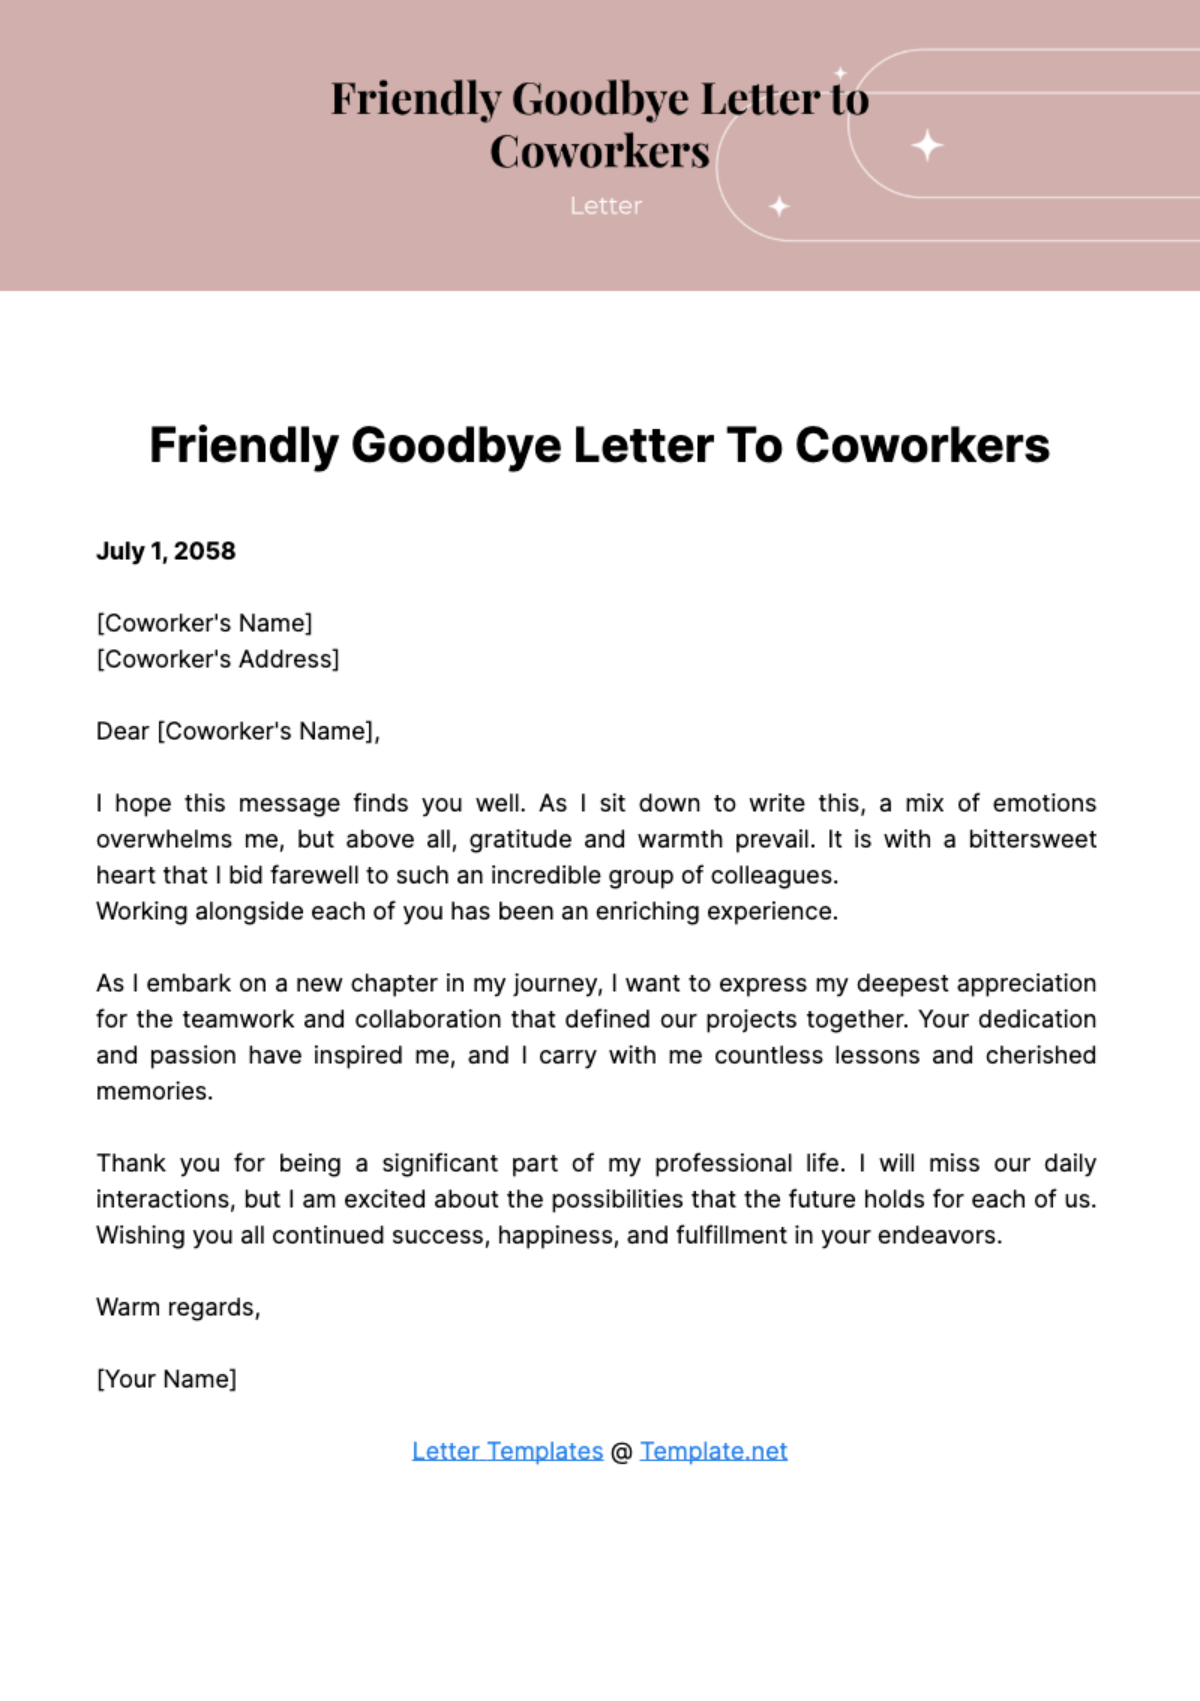 Free Friendly Goodbye Letter to Coworkers Template